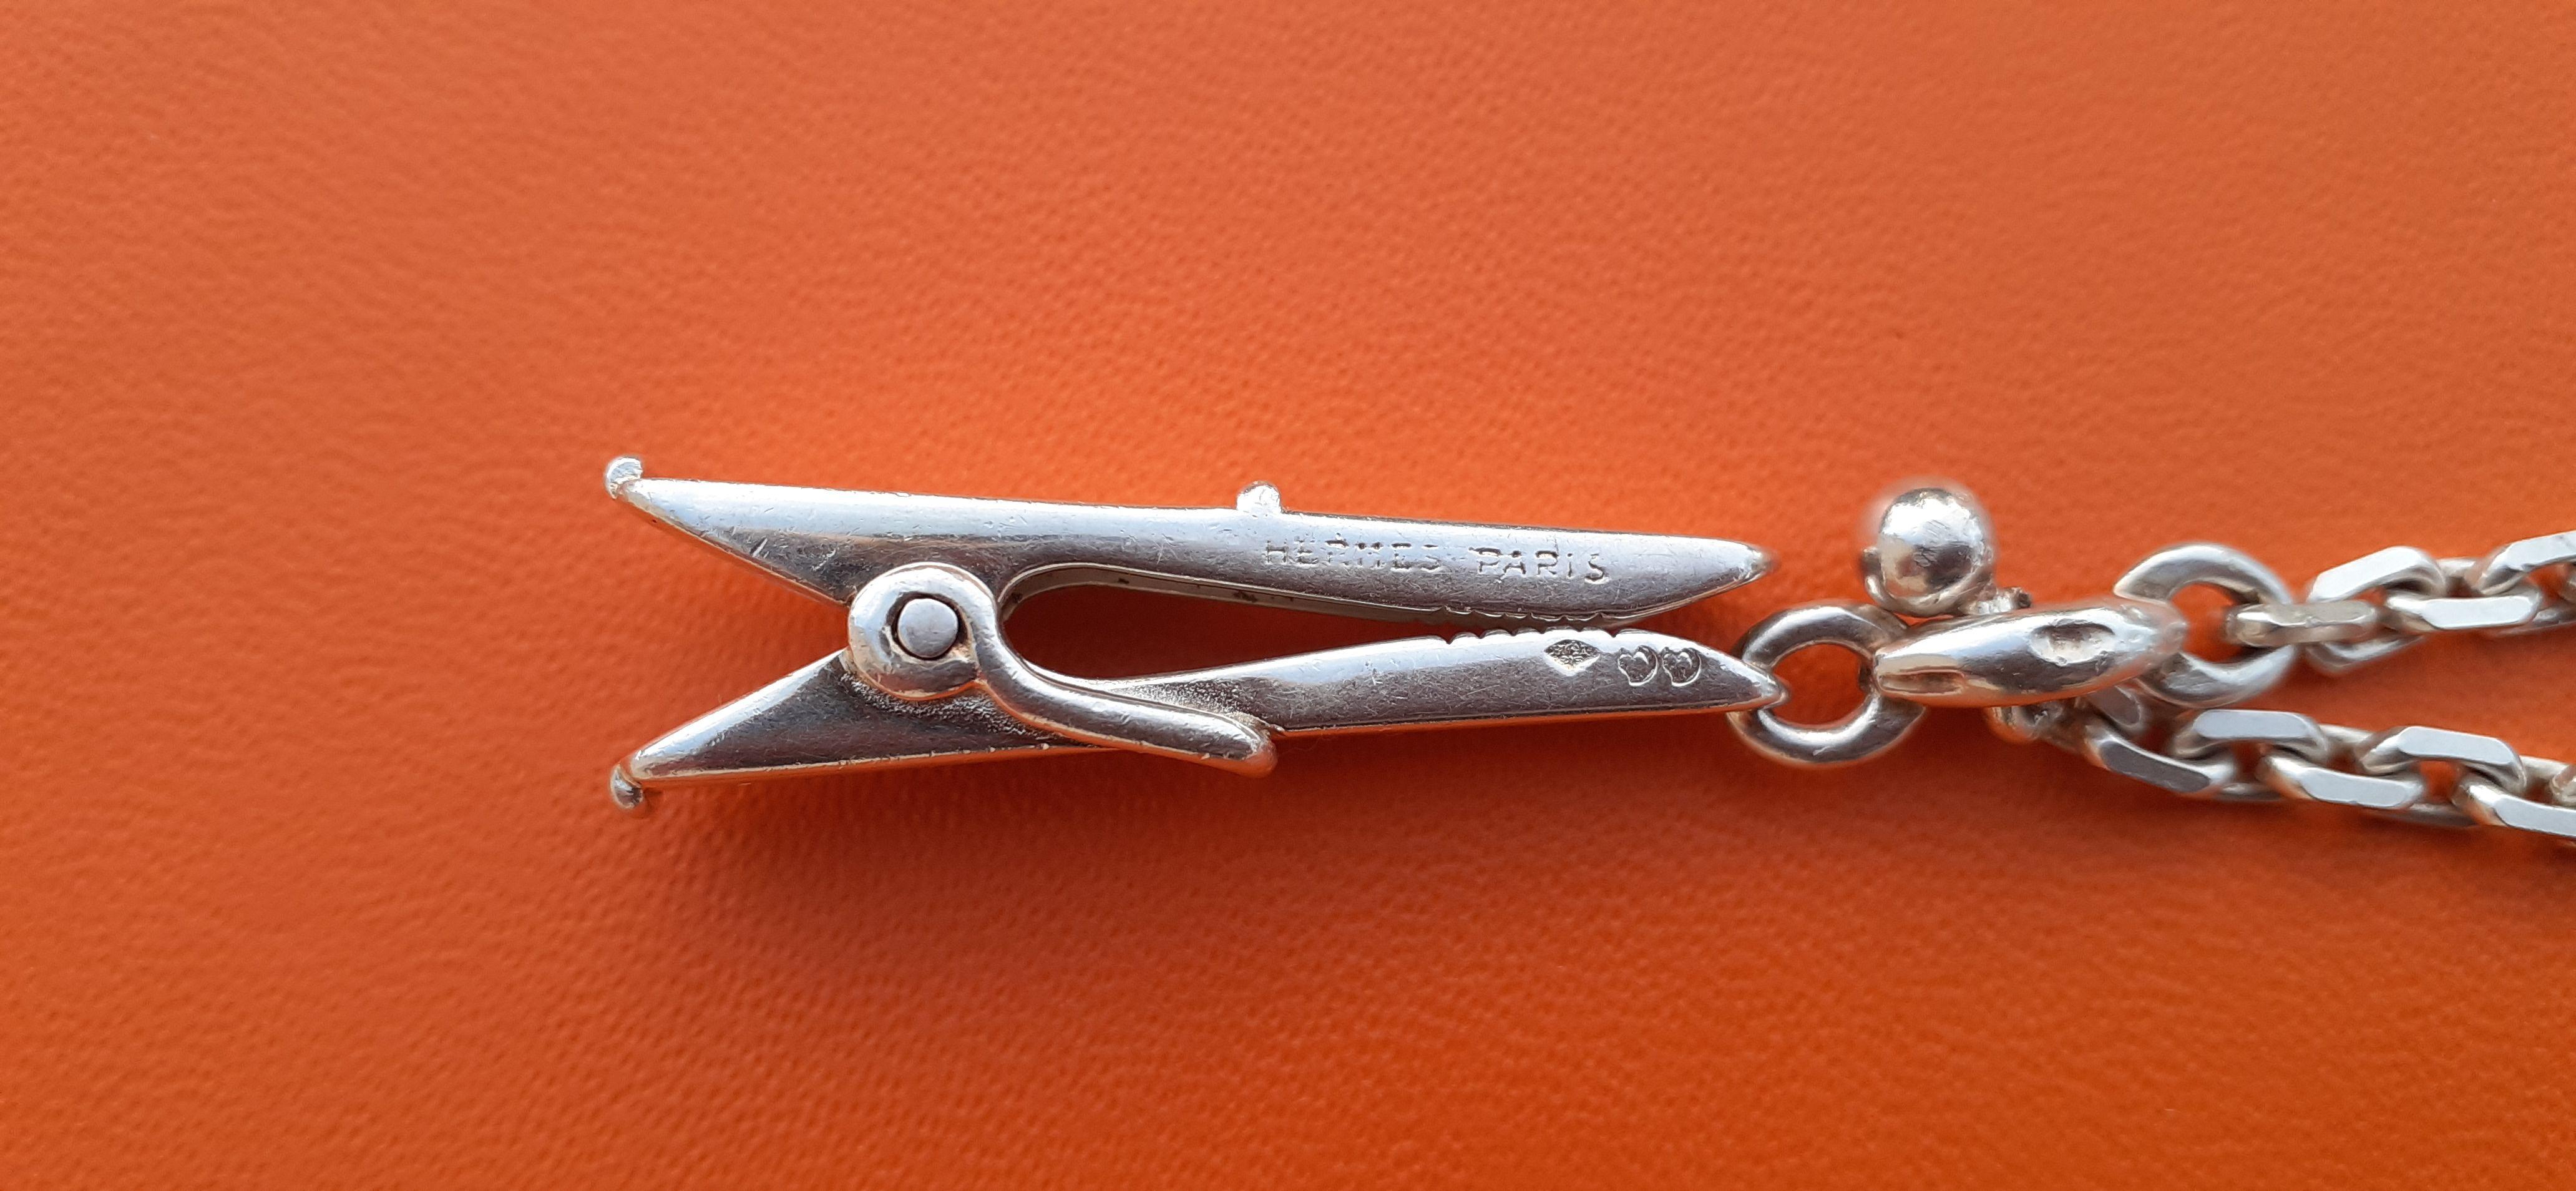 Rare Authentic Hermès Money Clip Key Holder

In the shape of a cute Clothespin

Like the big ones, it really opens

Vintage Item

Can be hanged as a charm thanks to its chain

Made of Silver

Colorway: silvery

